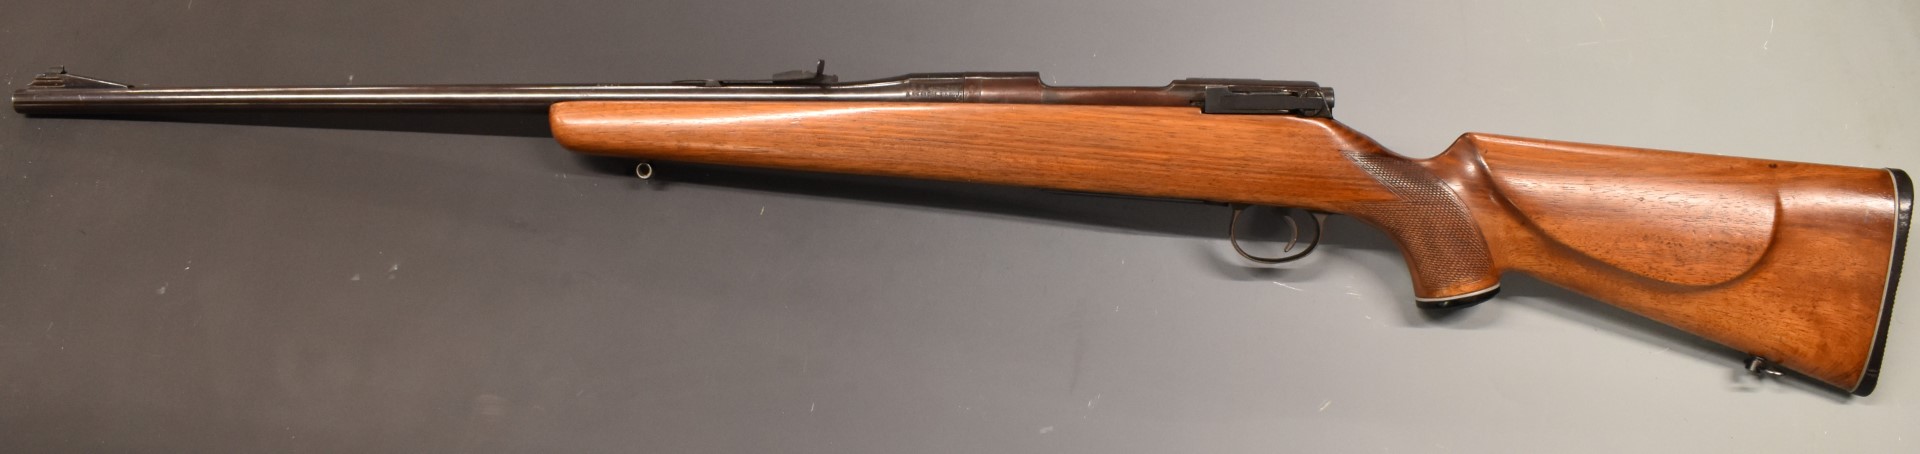 BSA .303 bolt-action rifle with chequered semi-pistol grip, adjustable sights, sling mounts and 24 - Image 3 of 3